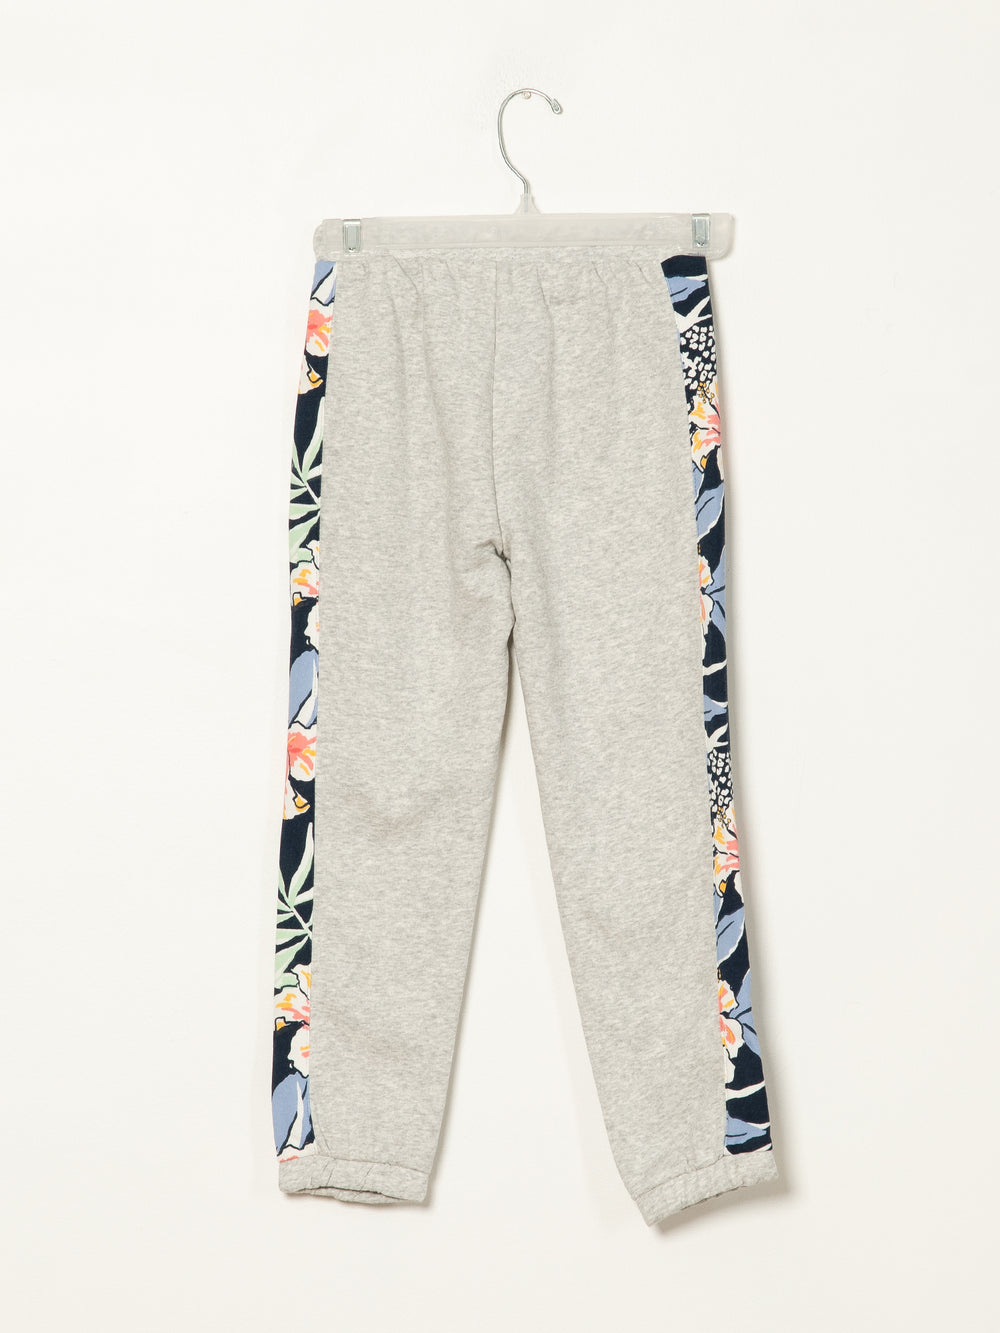 ROXY YOUTH GIRLS WHAT A TIME SWEATPANT  - CLEARANCE